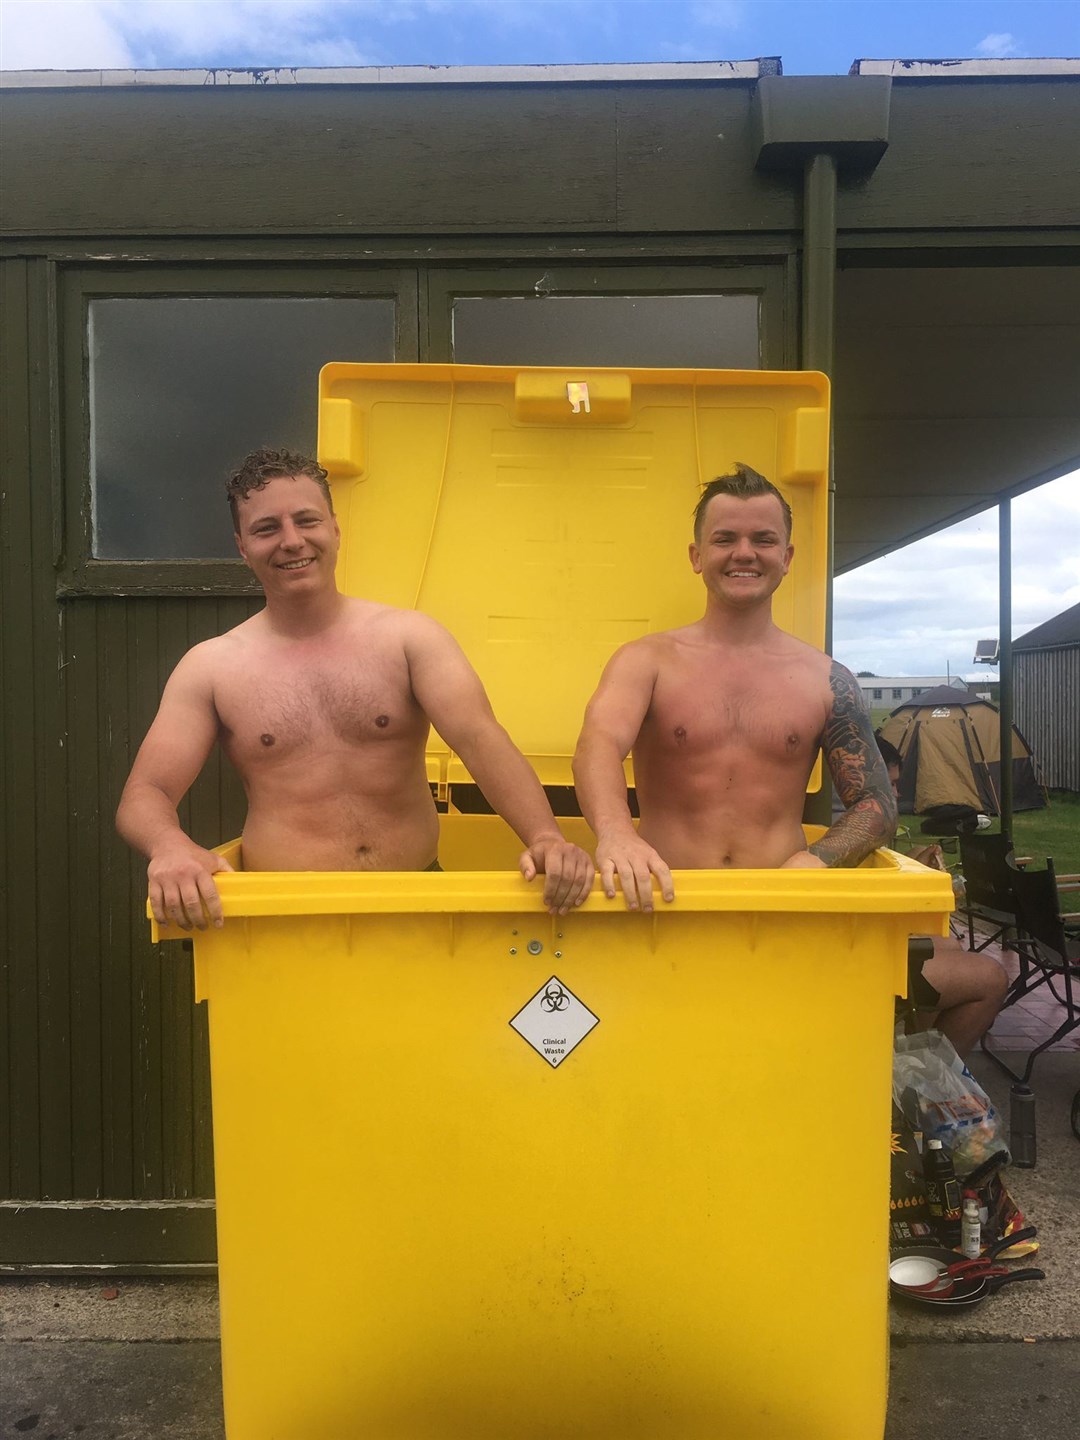 it's ice bath time for two of the RAF Lossiemouth Owls team to ease aching muscles.